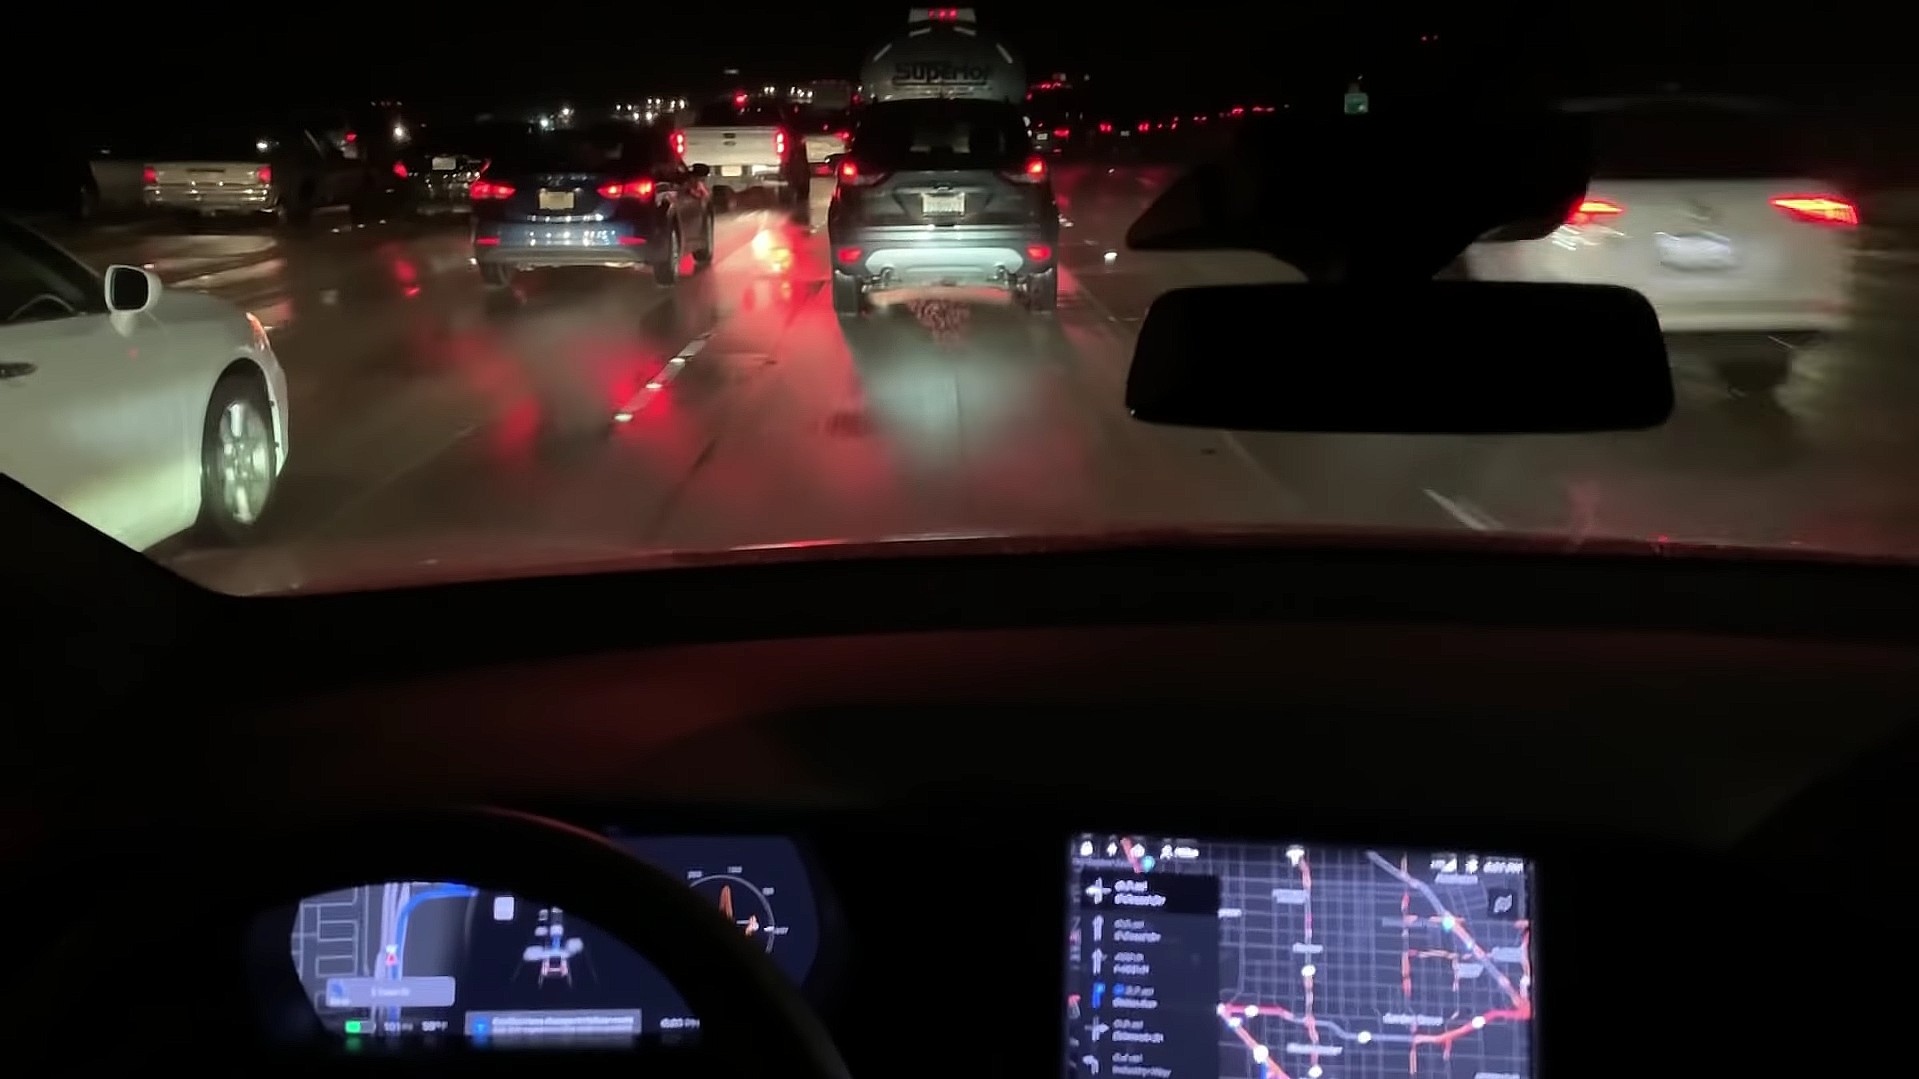 Tesla’s Navigate on Autopilot takes on heavy traffic and rainy roads in nighttime test